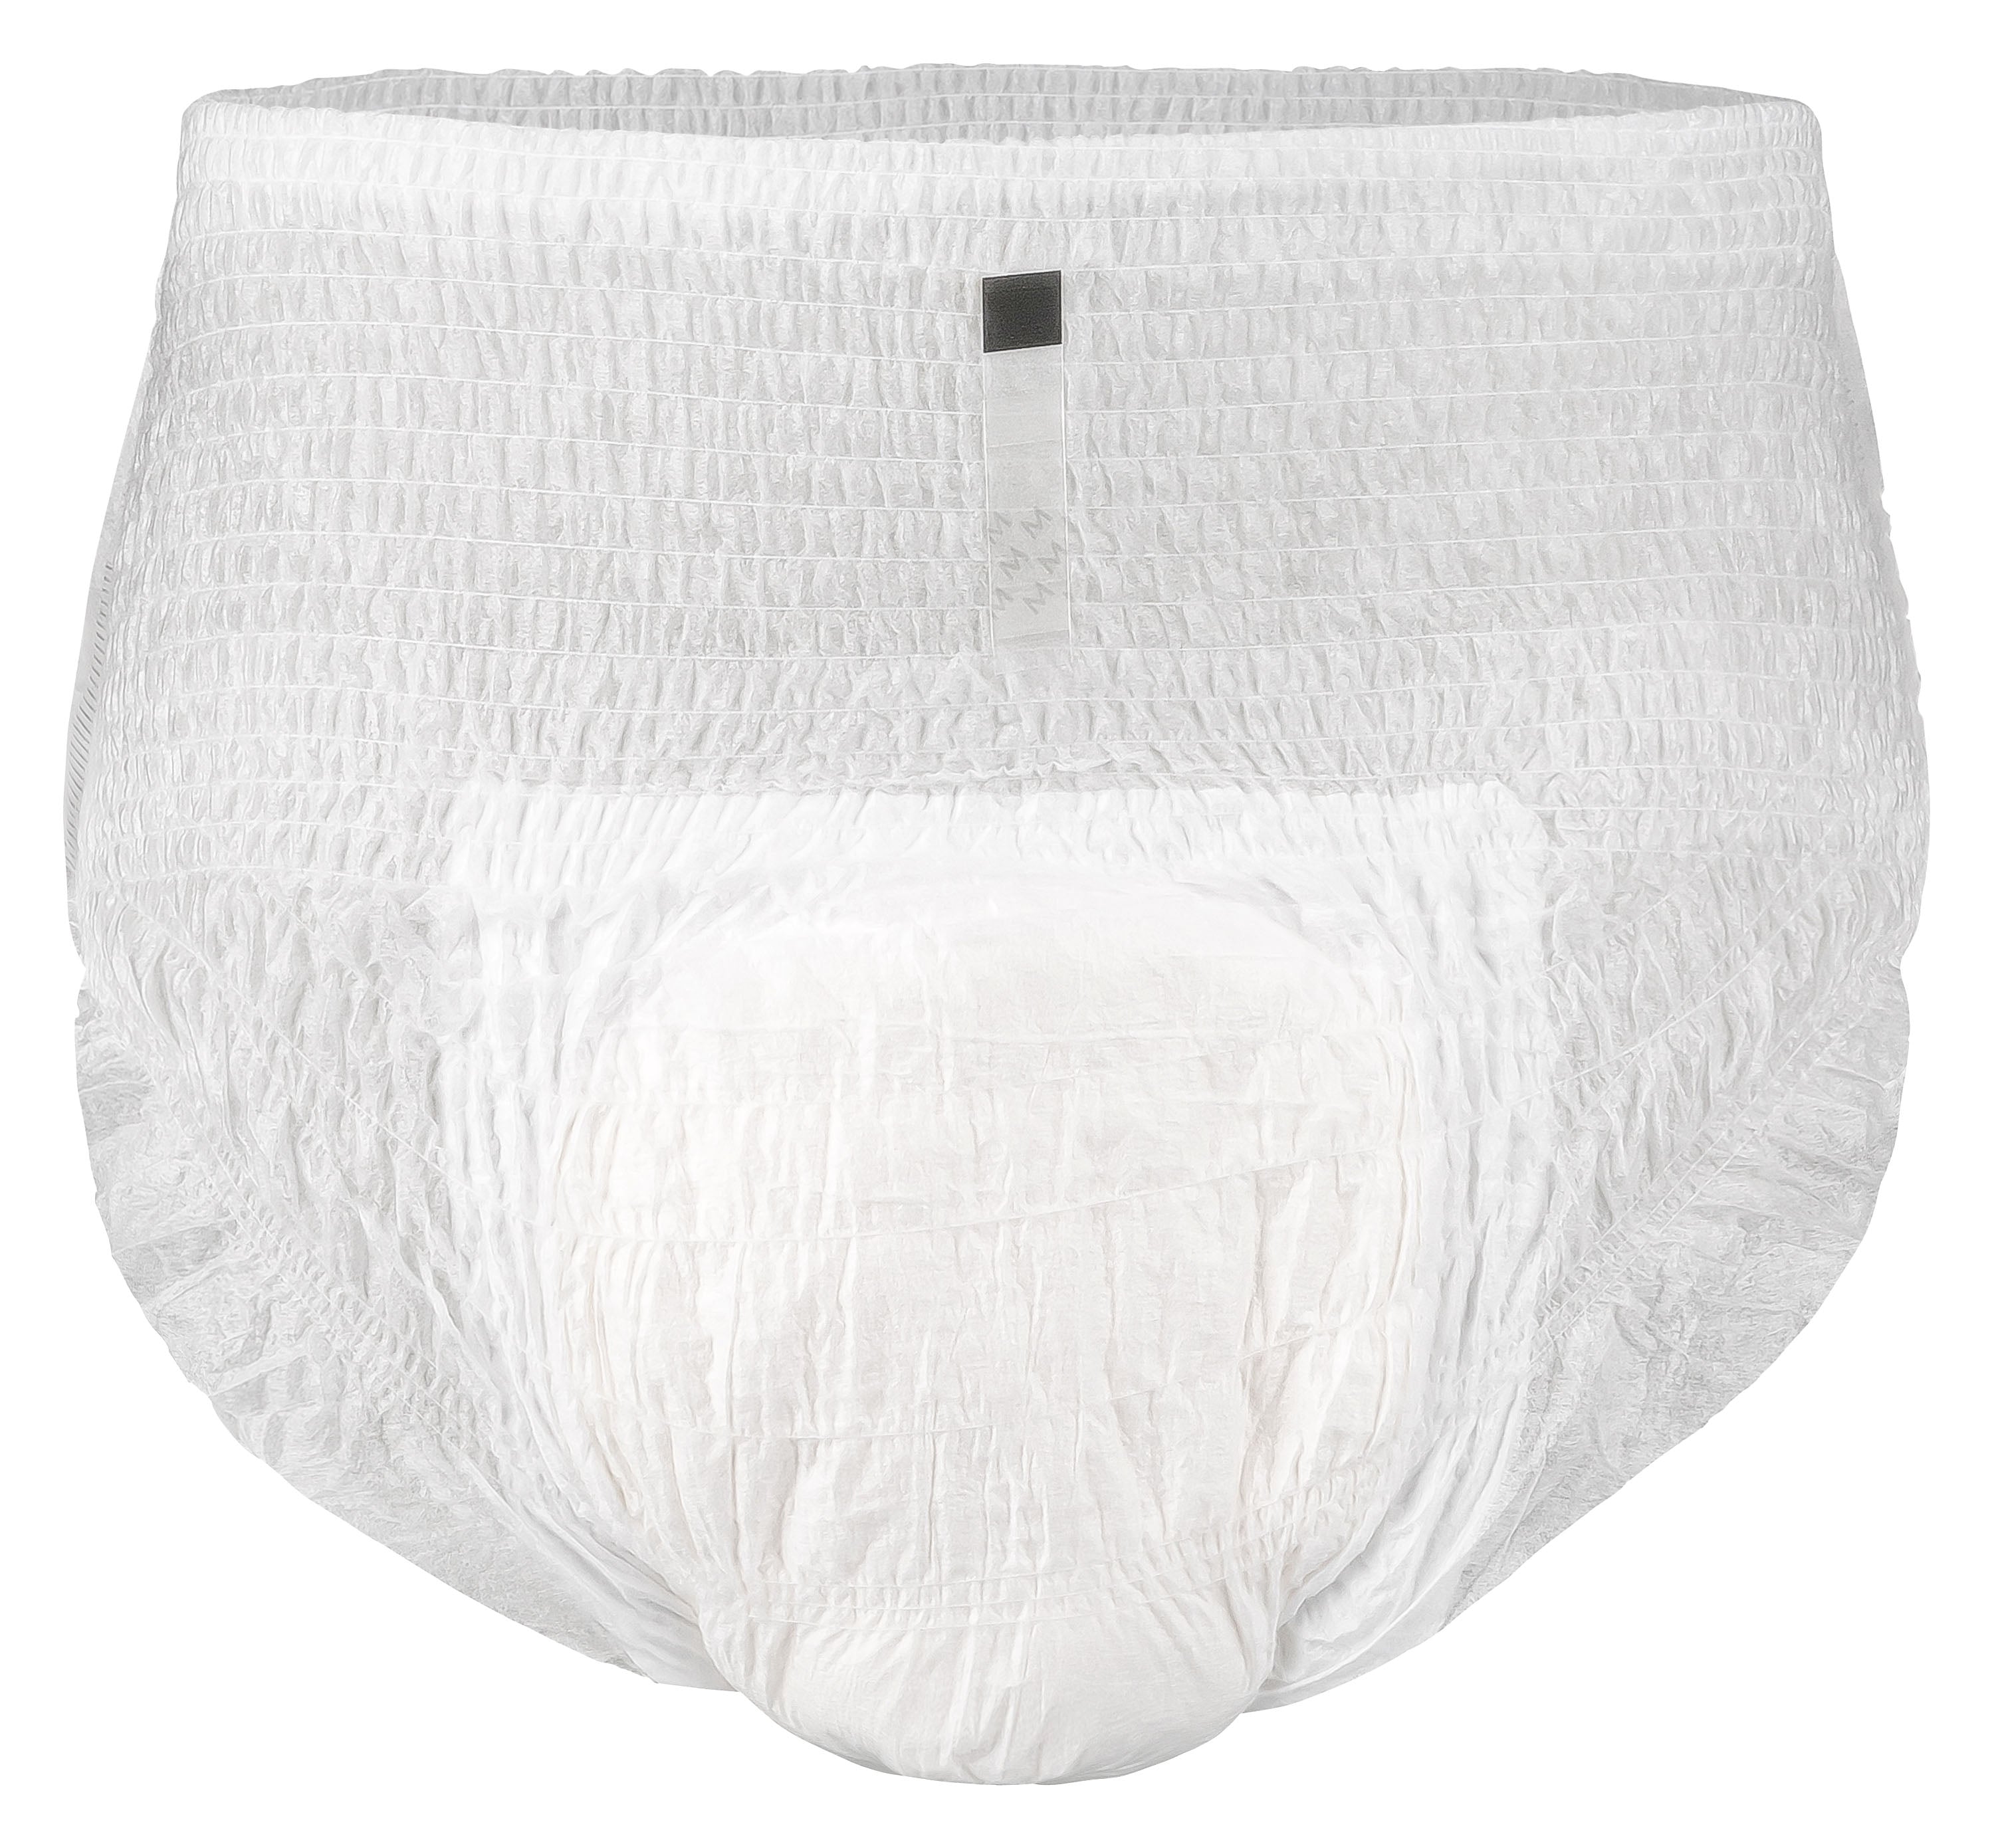 BetterDry Pull-On M8 adult diaper back